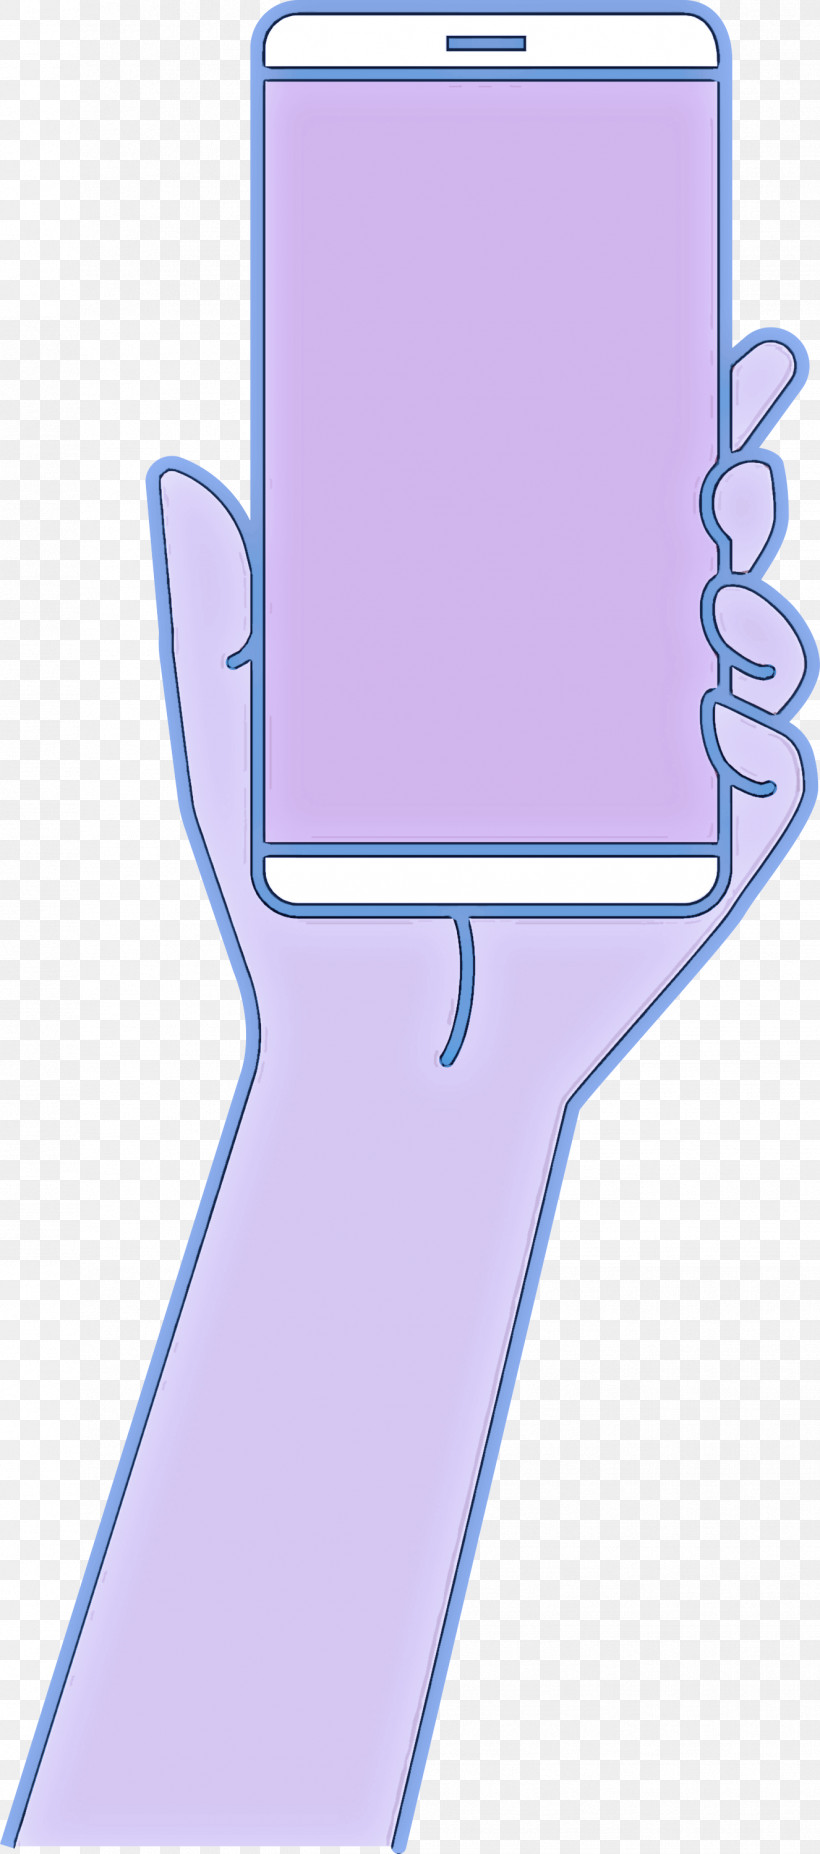 Smartphone Hand, PNG, 1326x2999px, Smartphone, Electric Blue M, Hand, Hm, Lavender Download Free